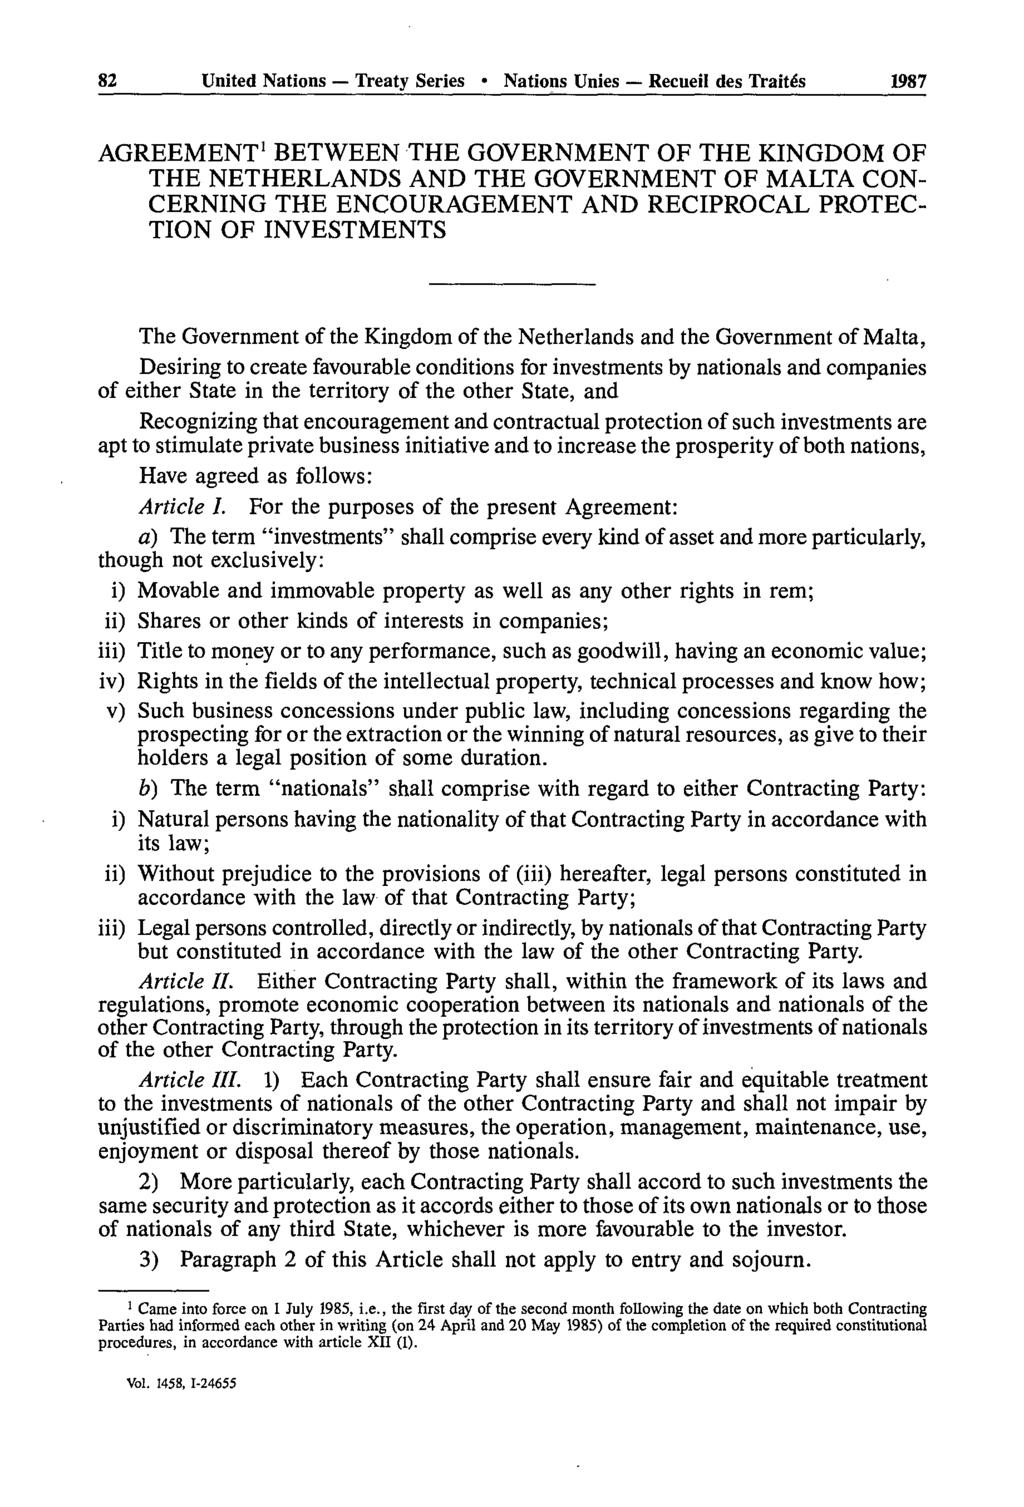 82 United Nations Treaty Series Nations Unies Recueil des Traités 1987 AGREEMENT 1 BETWEEN THE GOVERNMENT OF THE KINGDOM OF THE NETHERLANDS AND THE GOVERNMENT OF MALTA CON CERNING THE ENCOURAGEMENT